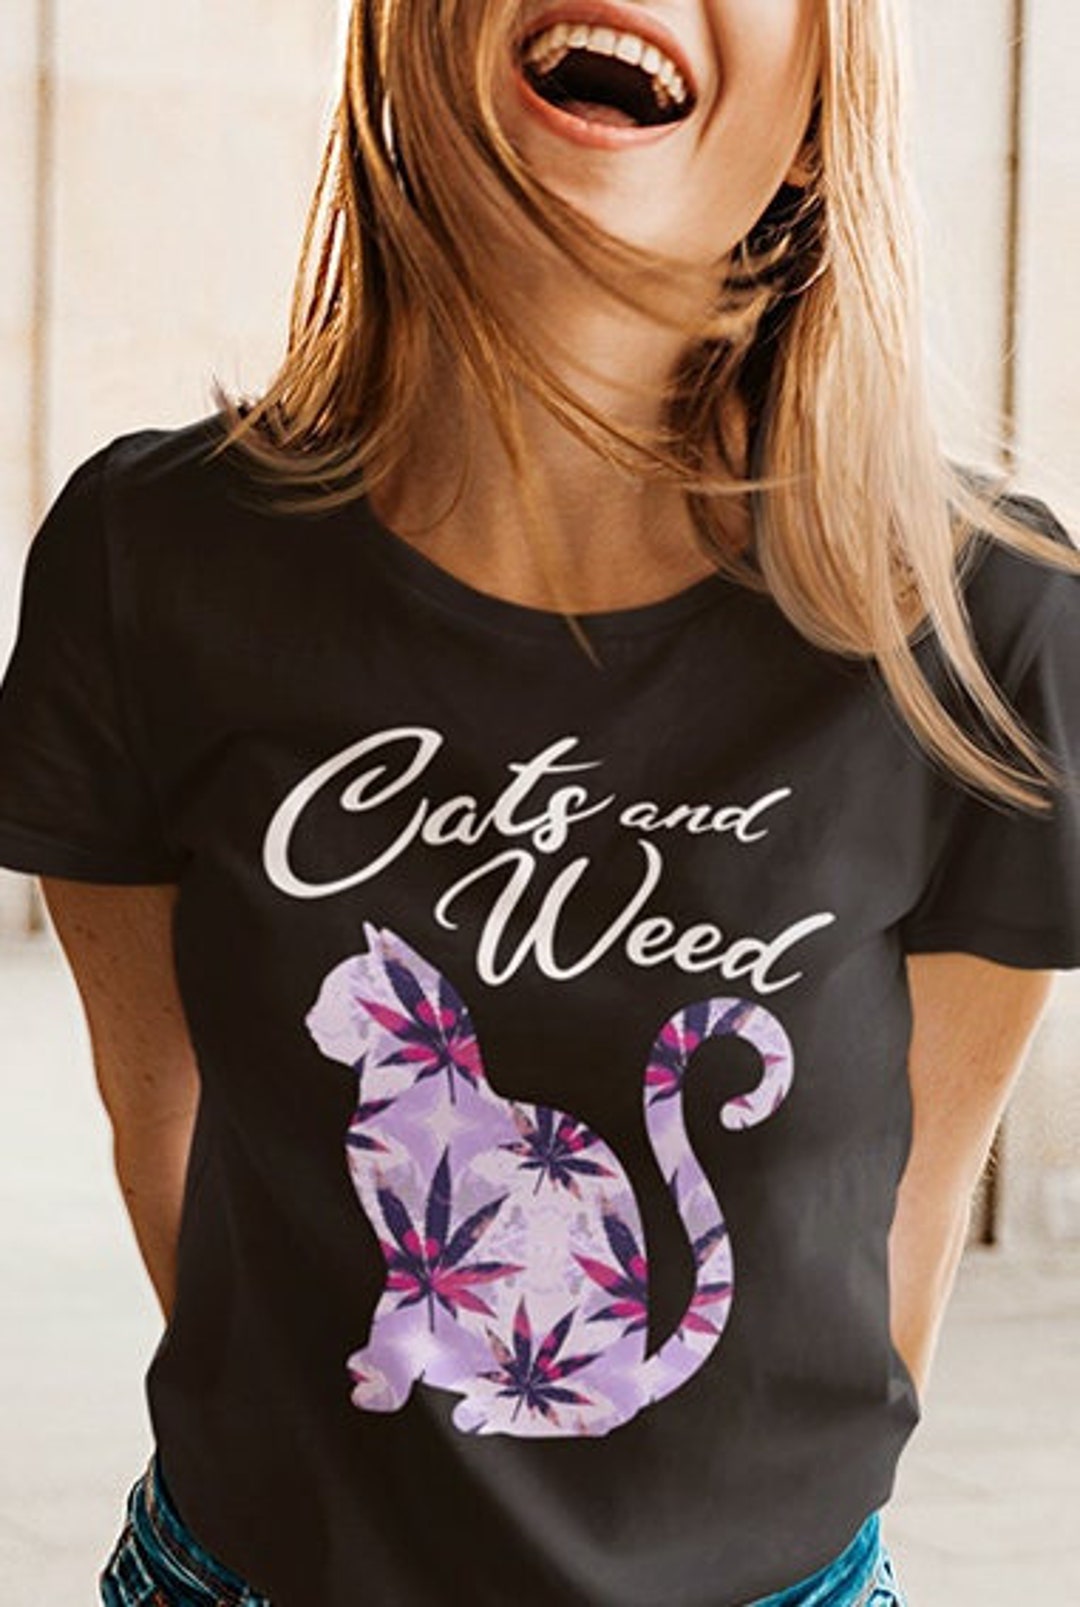 Cats and Weed Shirt Weed and Cats Cat Lover Shirt Cat Owner - Etsy